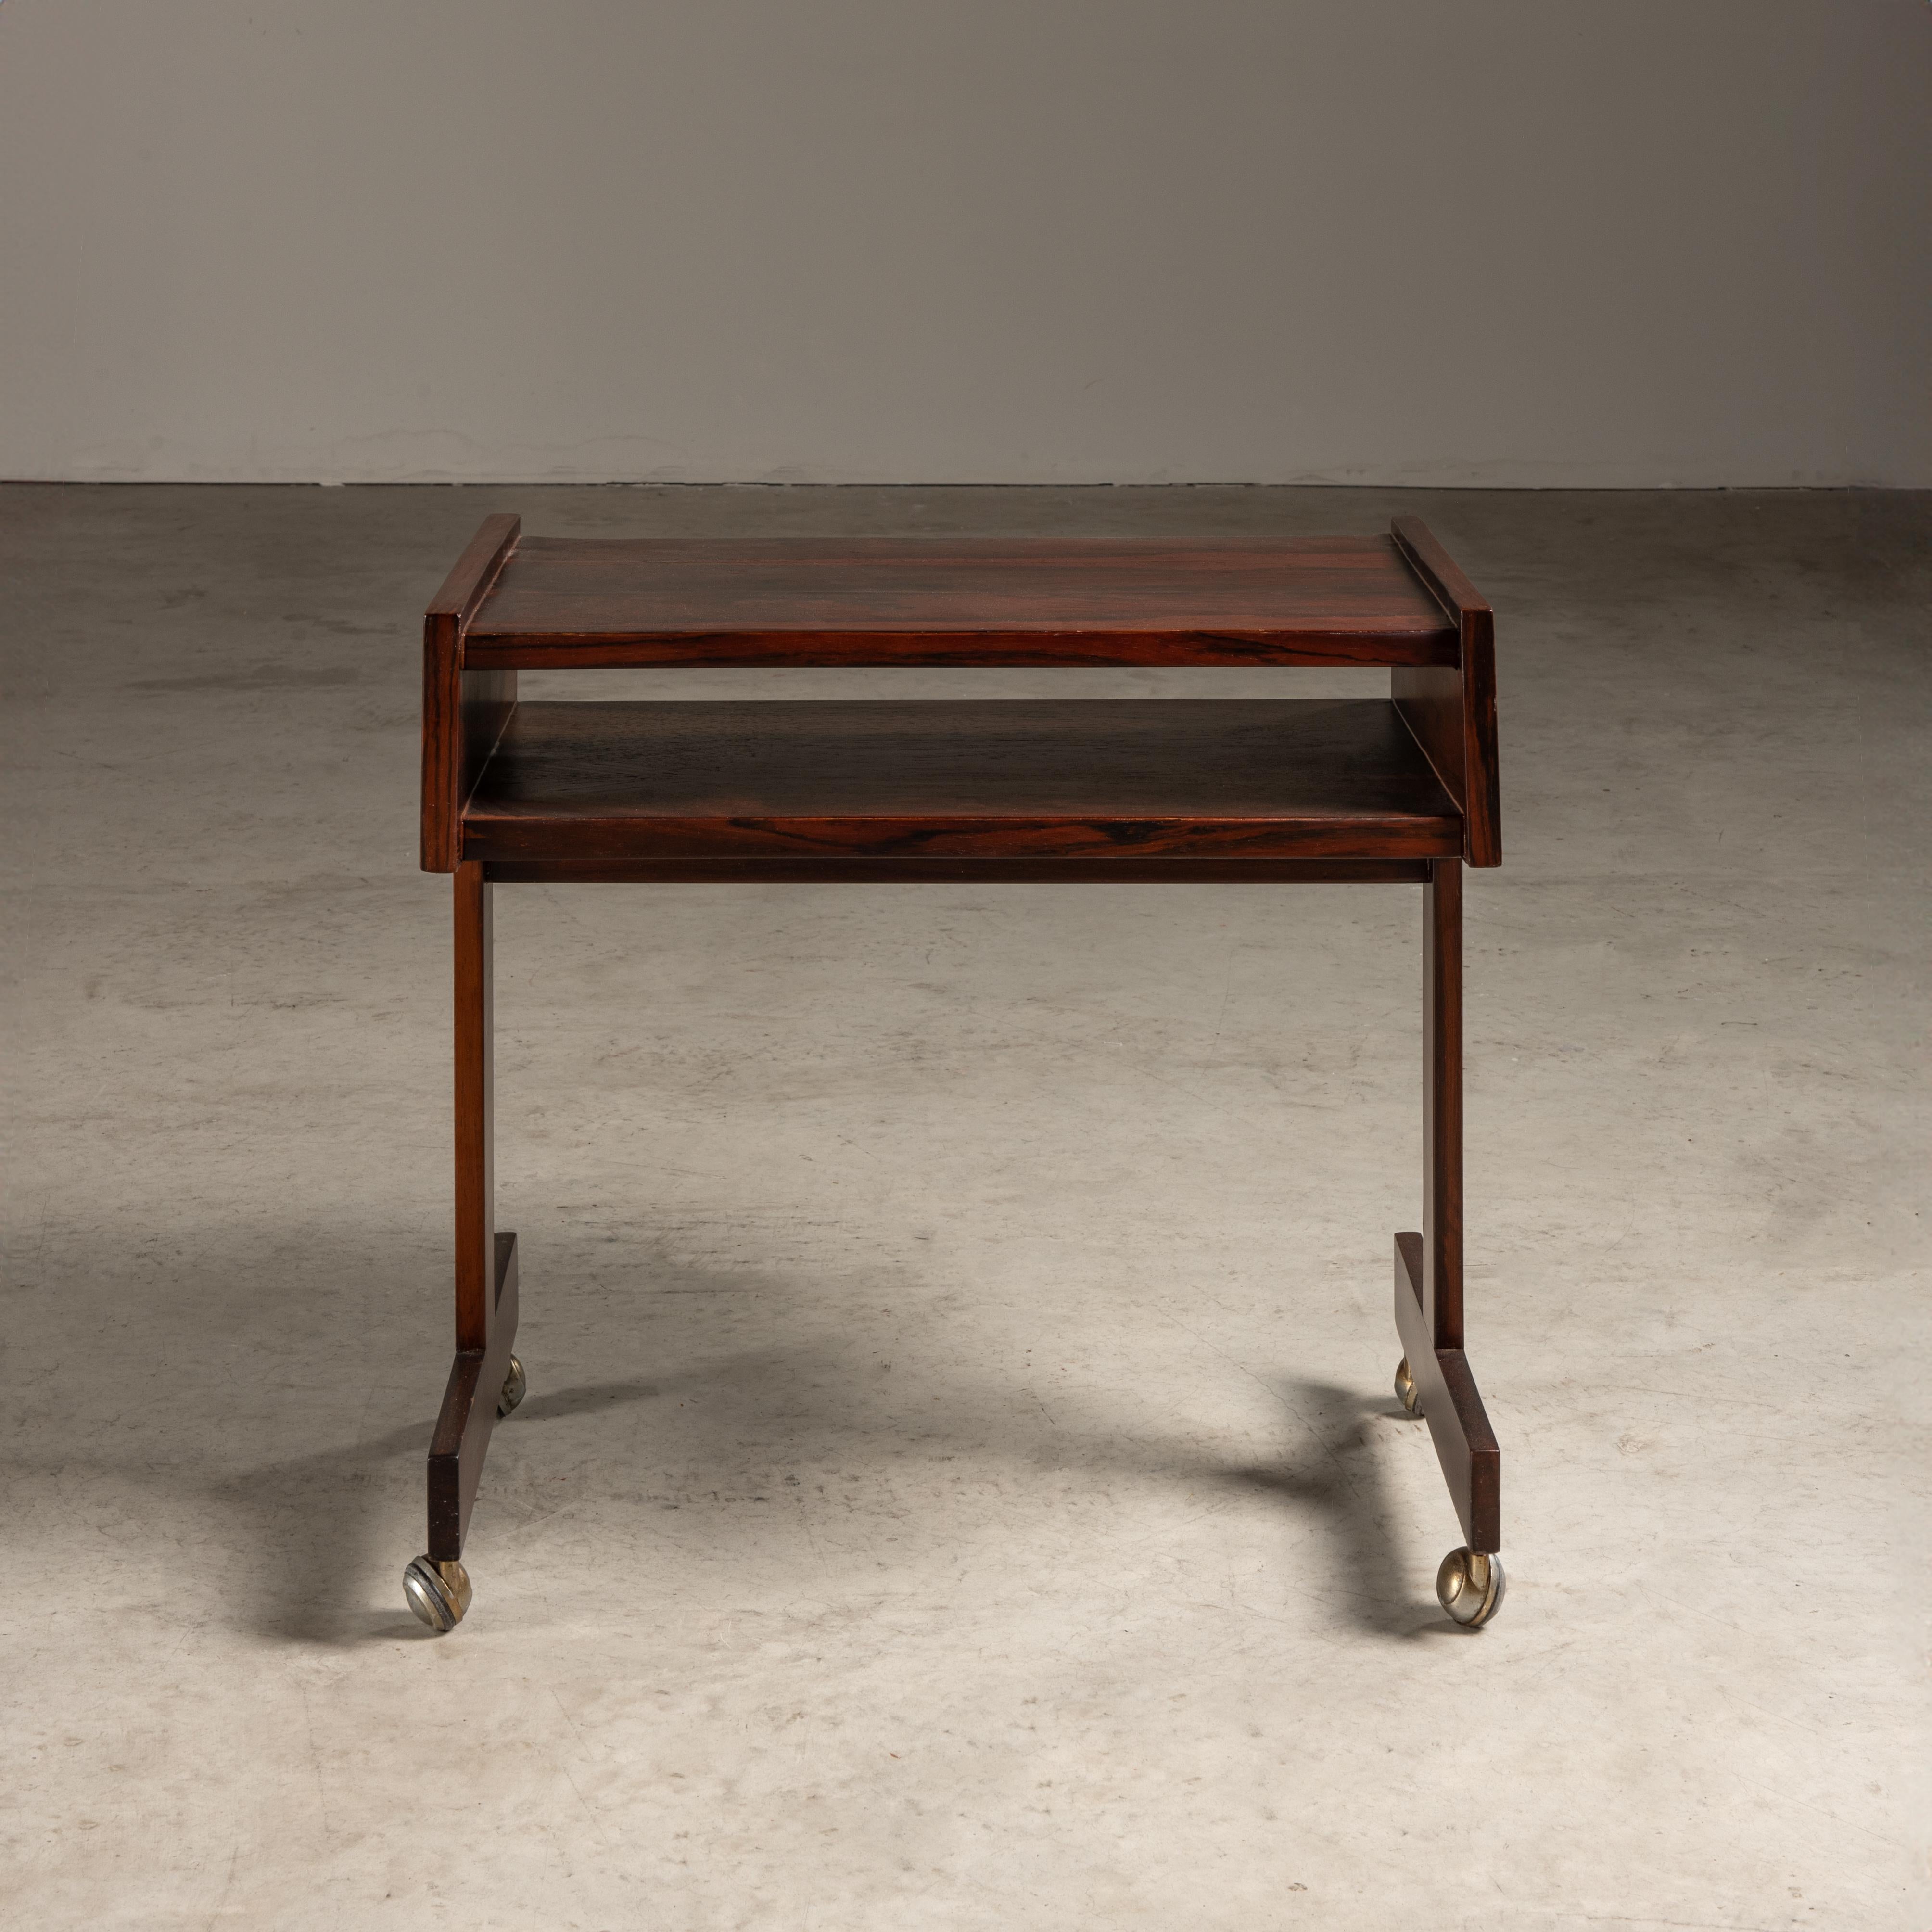 This side table by Sergio Rodrigues is a quintessential piece of mid-century Brazilian furniture design, which combines elegance with practical functionality.

The table features a rich, dark wood construction in Brazilian hardwood, which was